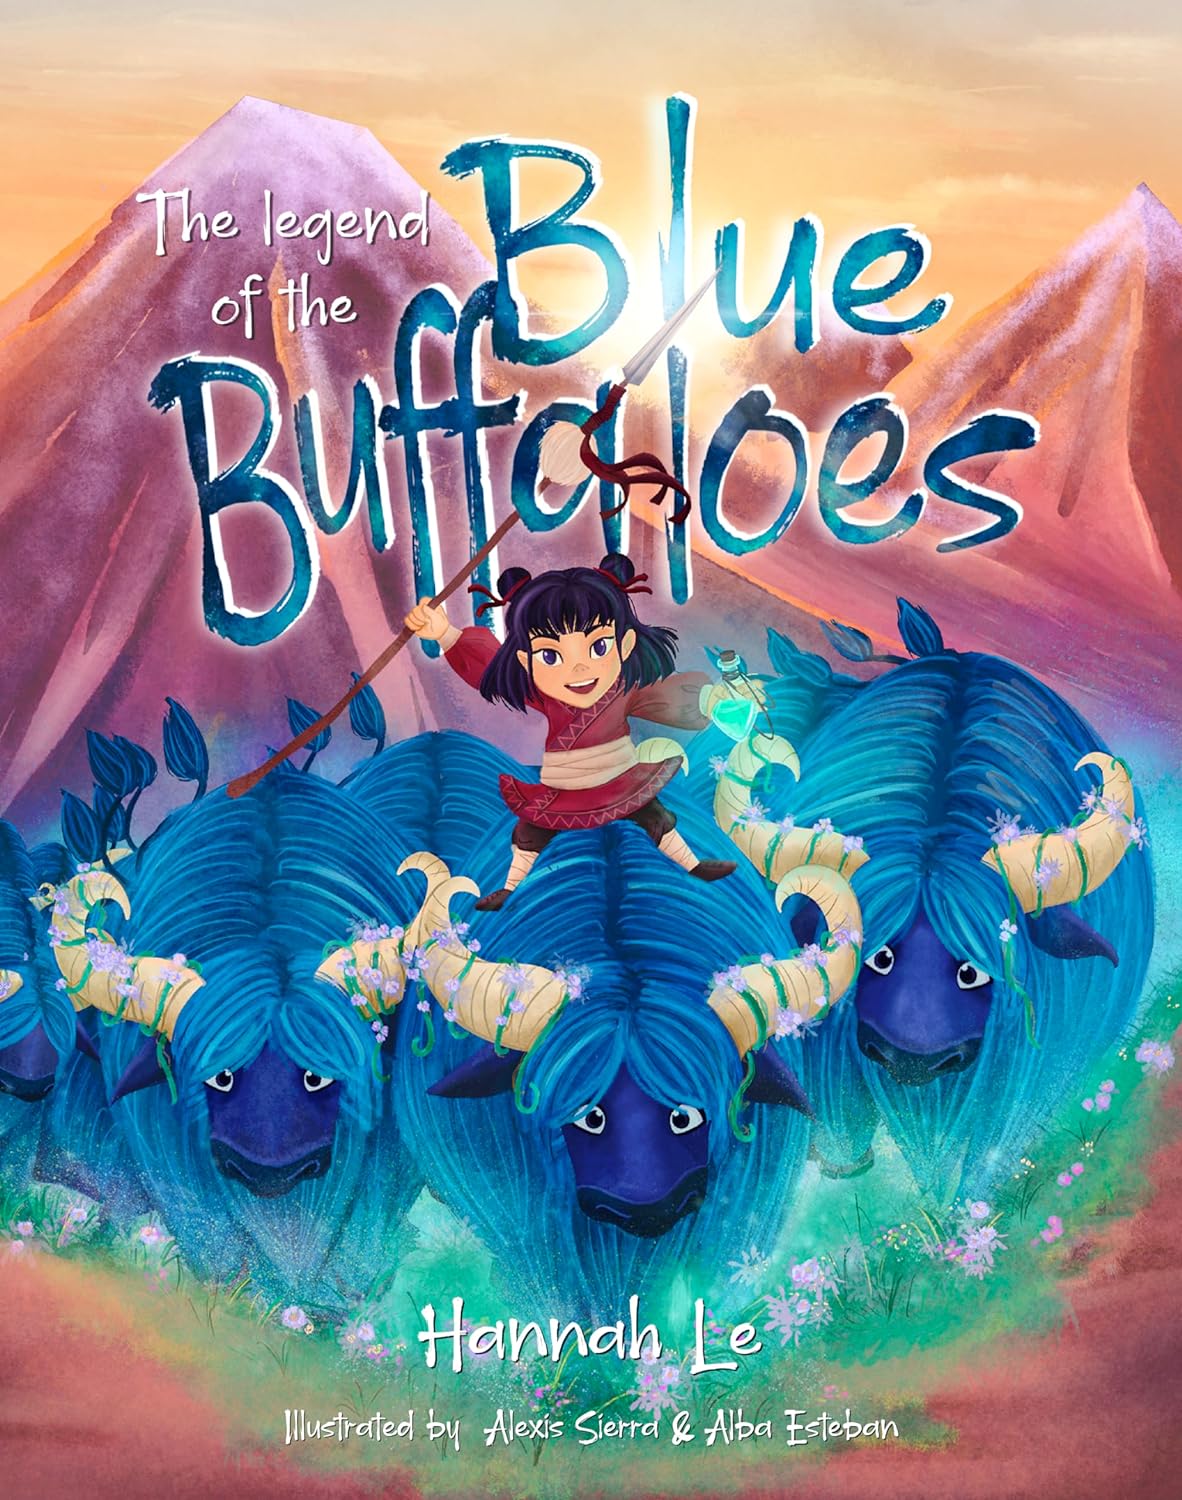 Hannah Le: The Legend of the Blue Buffaloes, illustrated by Alexis Sierra and Alba Esteban